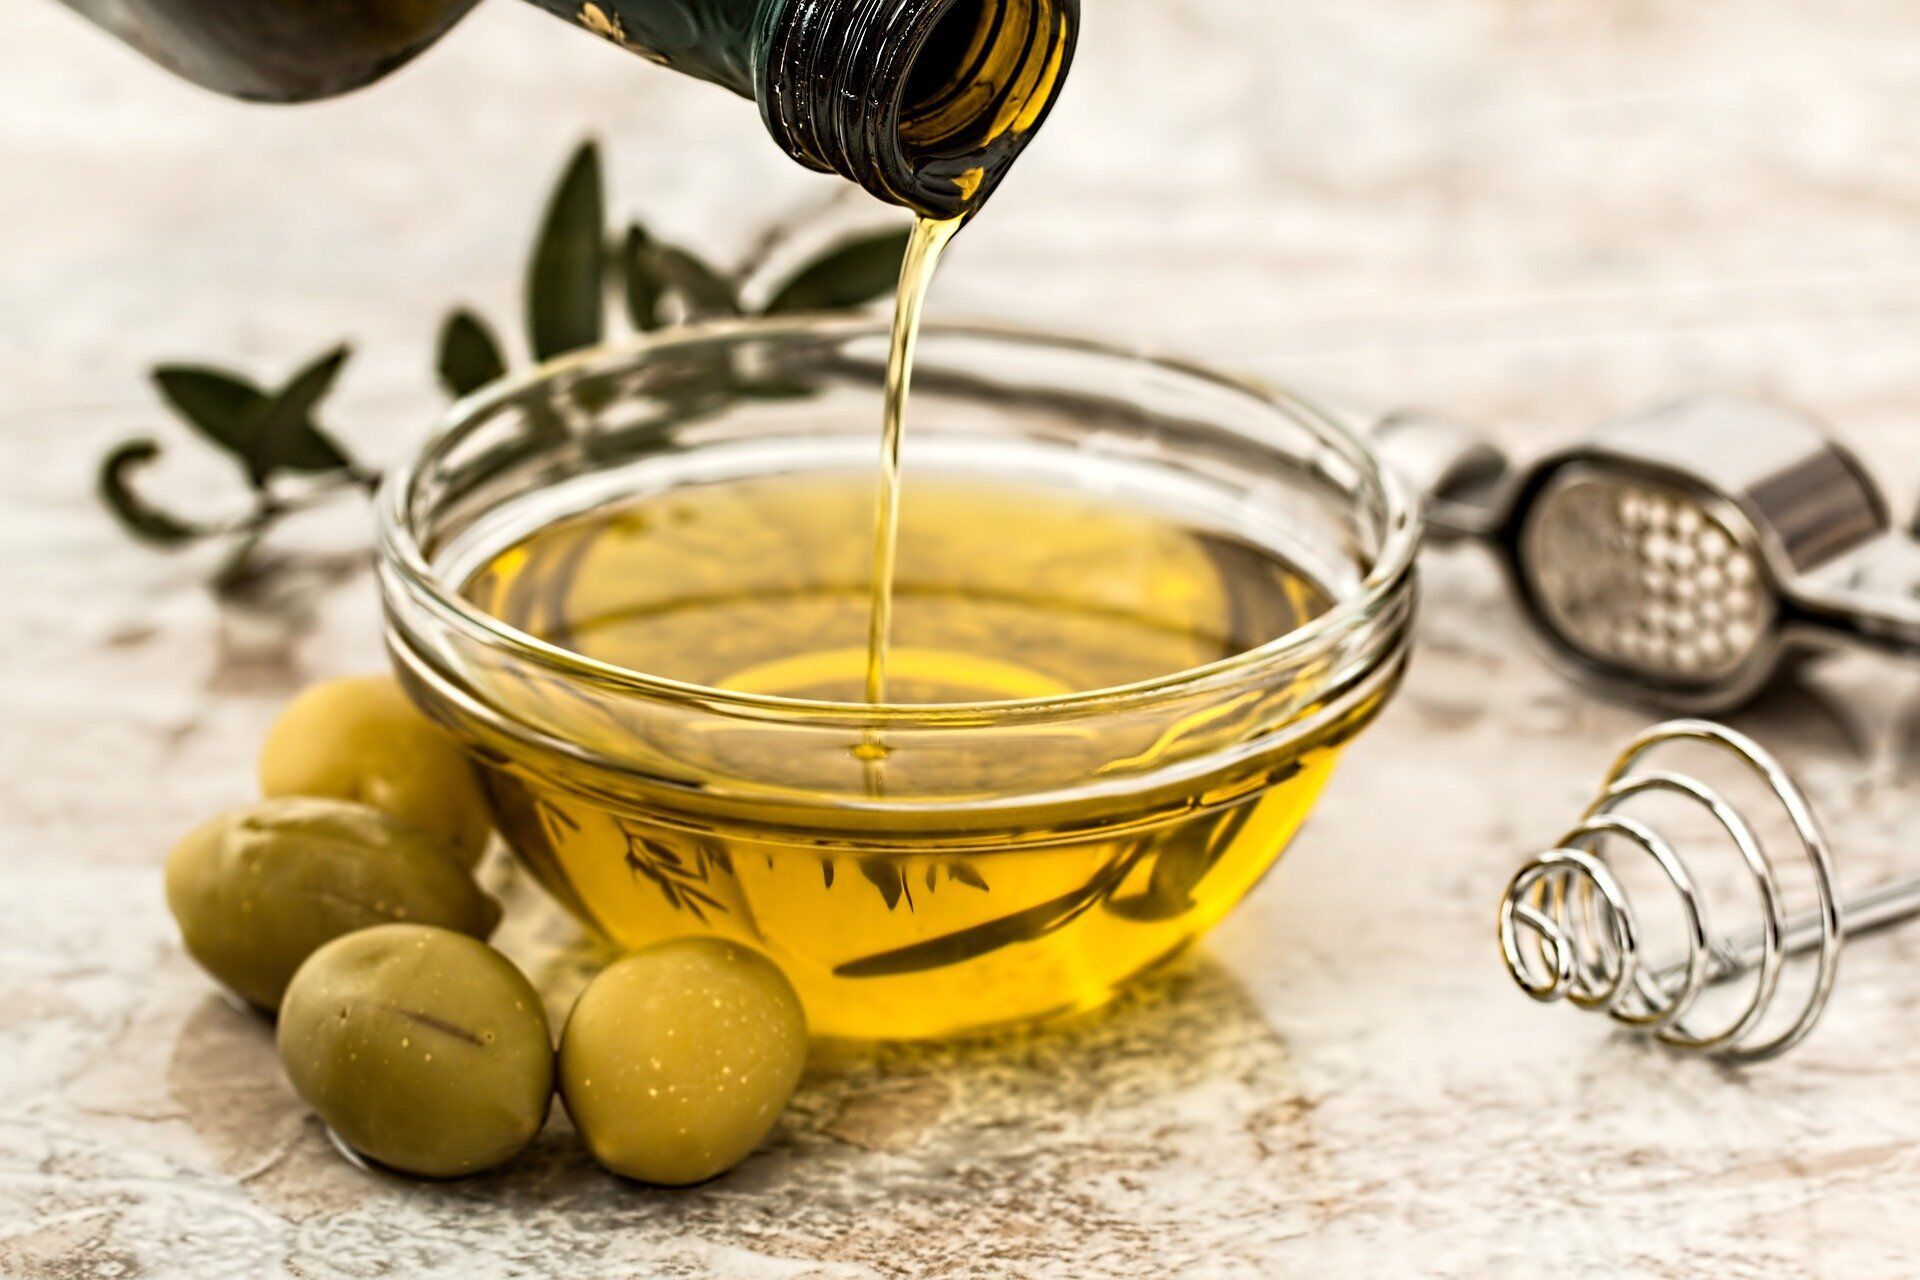 Olive oil will help get rid of tape marks on windows